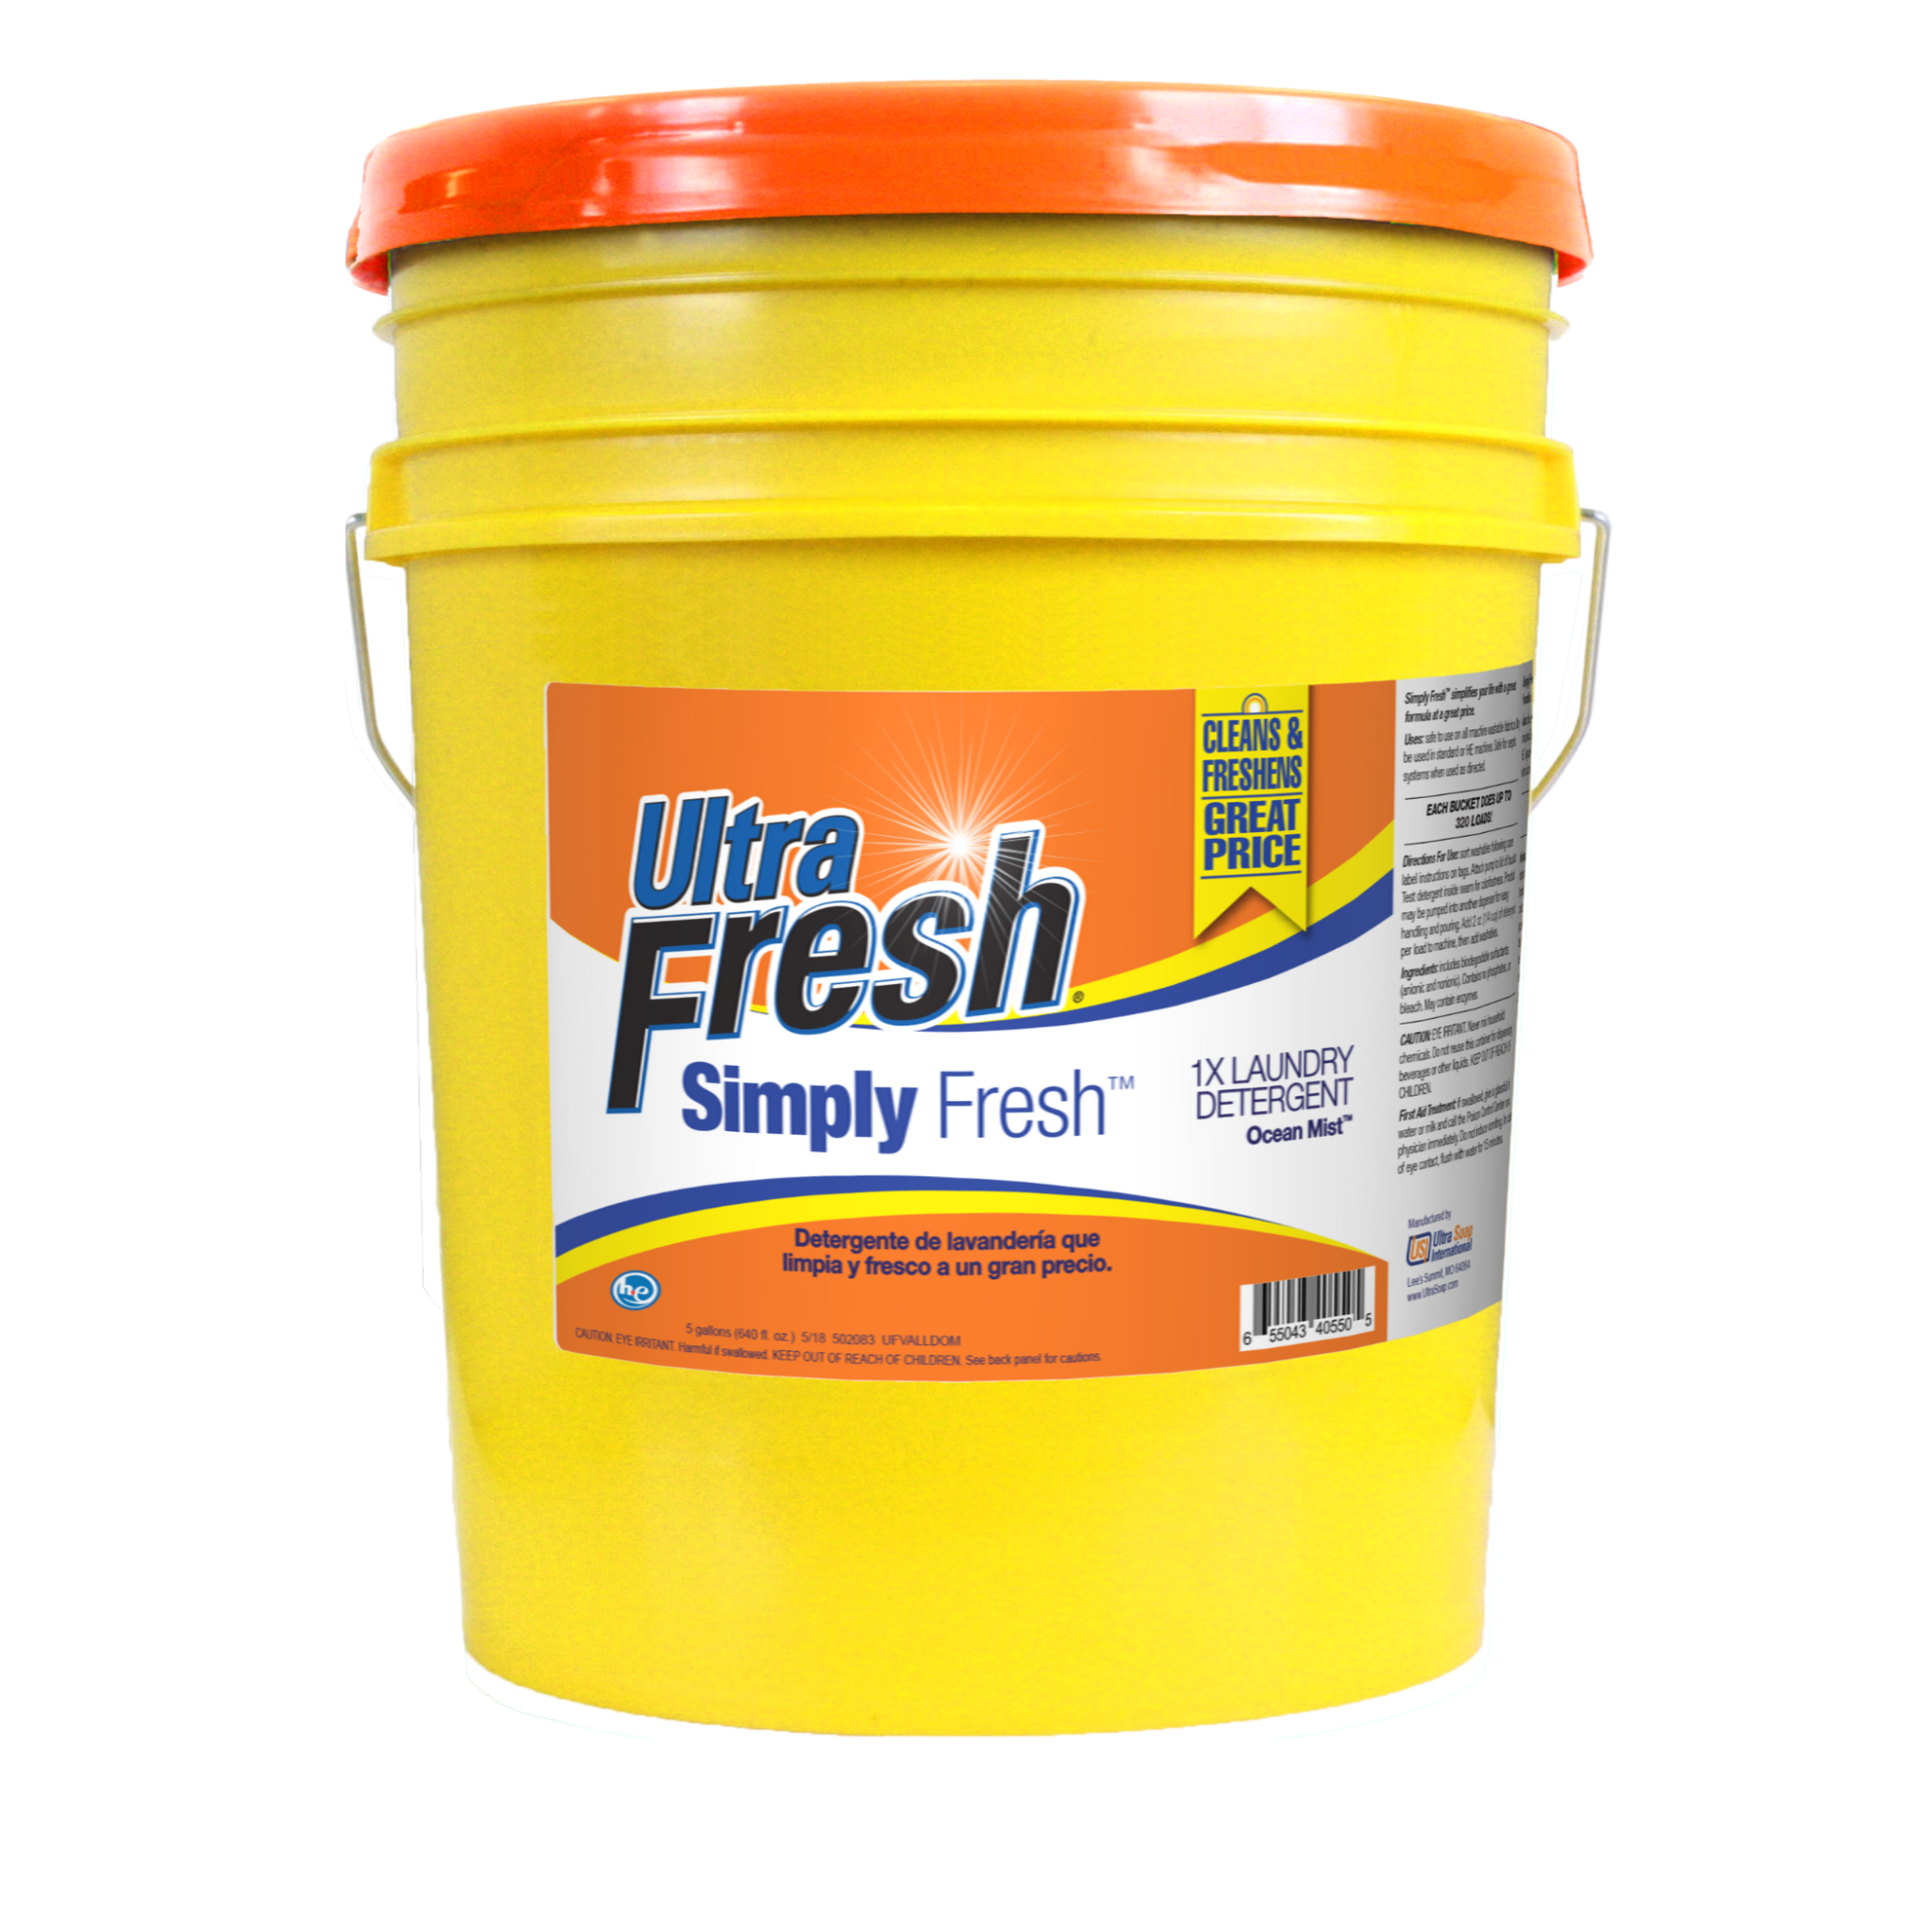 Simply Fresh Ocean Mist Laundry Detergent - 5 Gallons